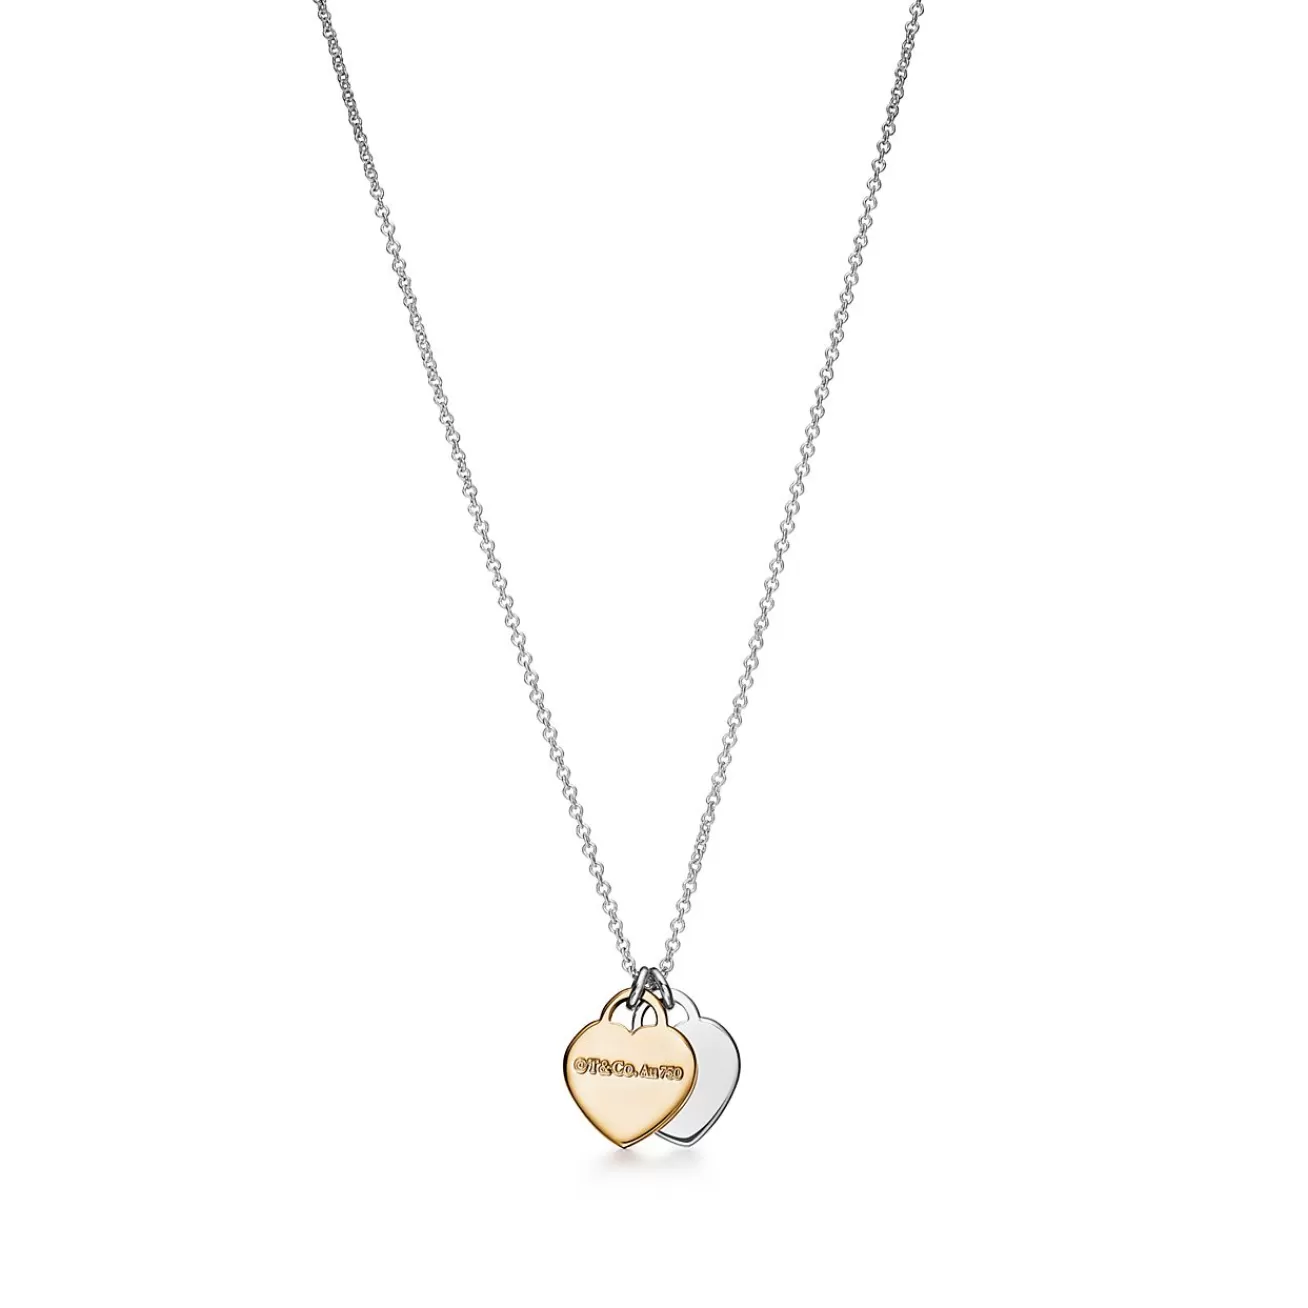 Tiffany & Co. Return to Tiffany™ mini double heart tag pendant in silver and 18k gold. | ^ Necklaces & Pendants | Gifts for Her